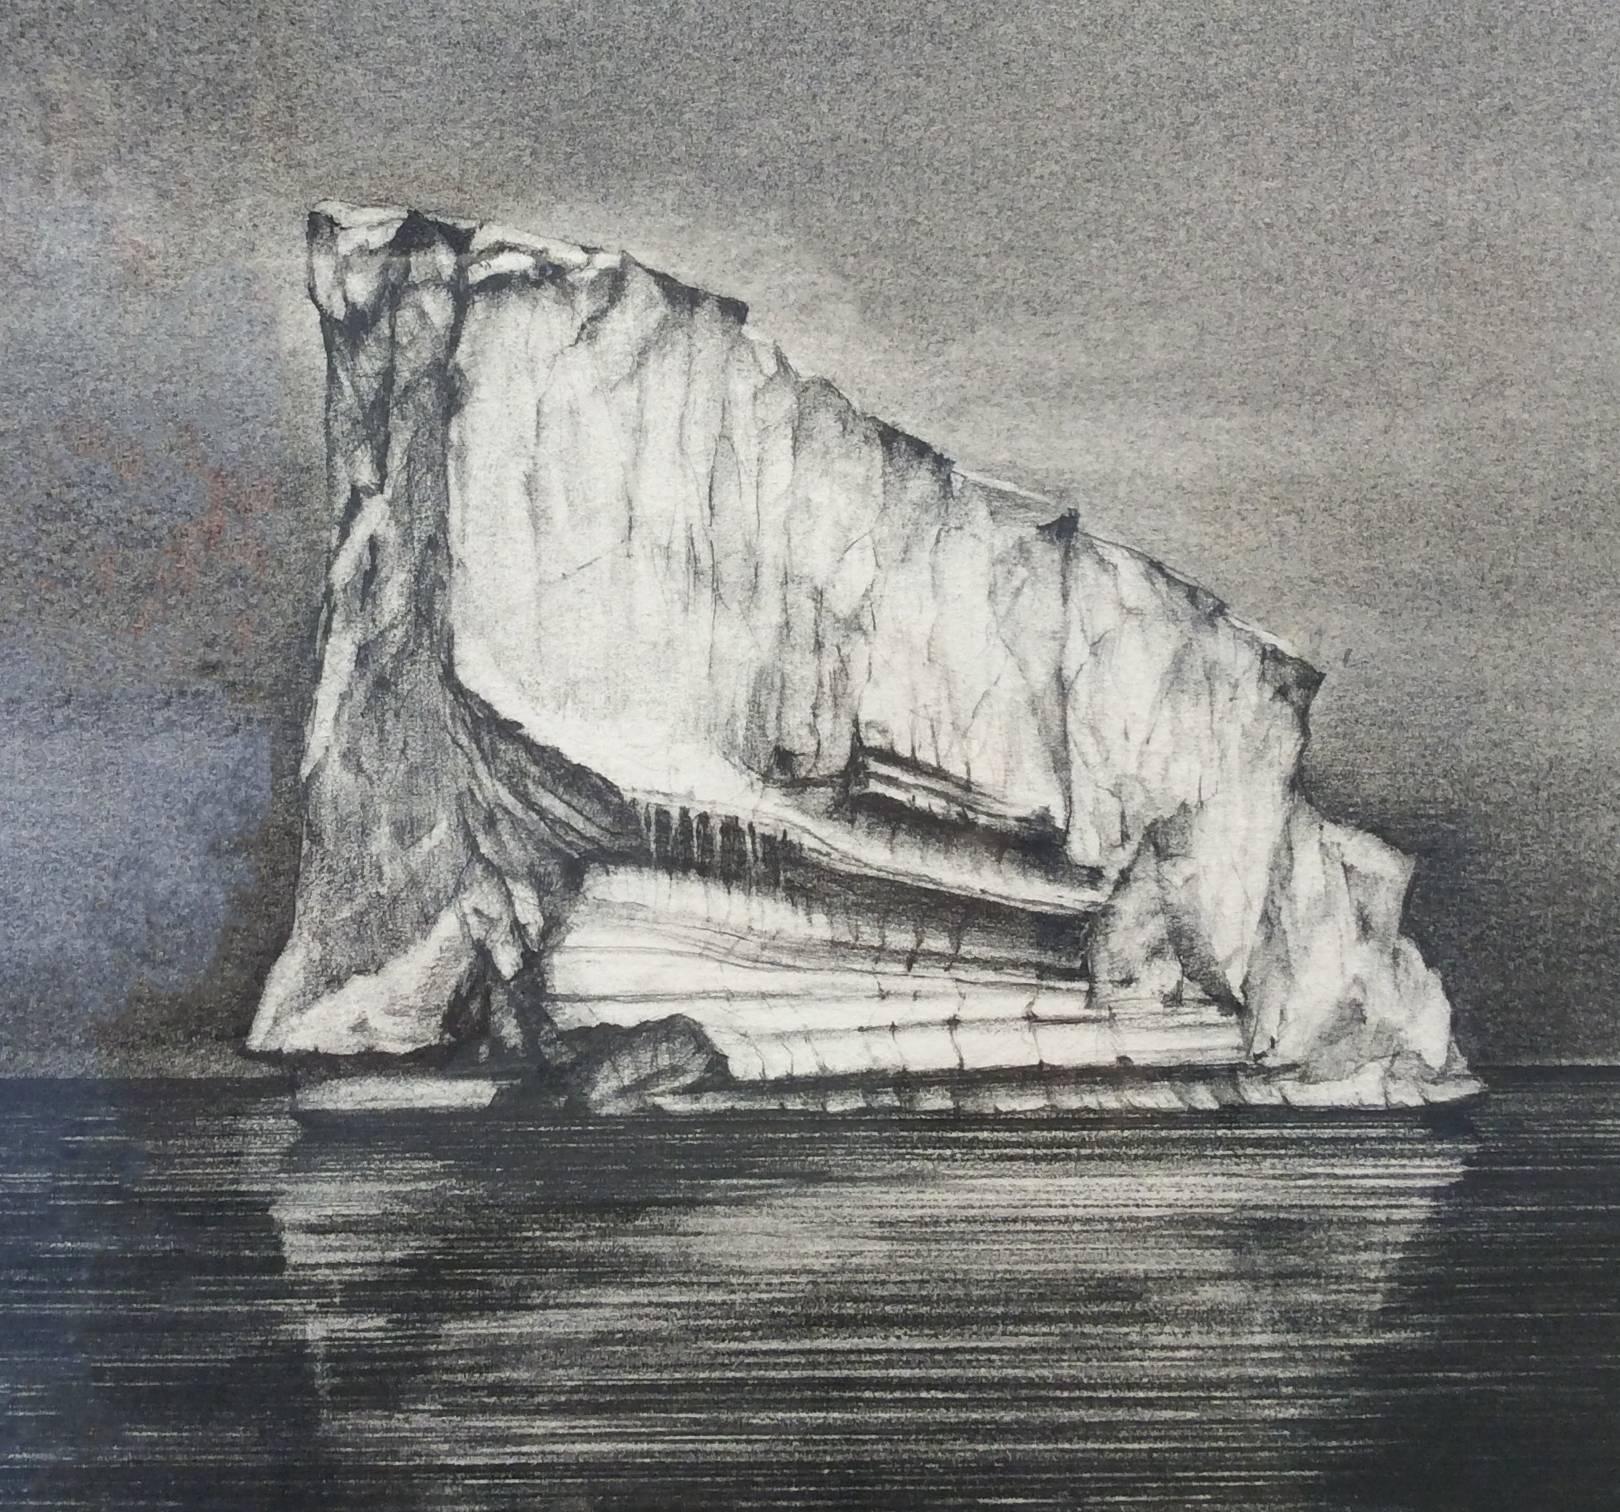 Iceberg Drawing 2: Black and White Landscape Drawing of Iceberg in Water, Framed - Contemporary Art by Juan Garcia-Nunez